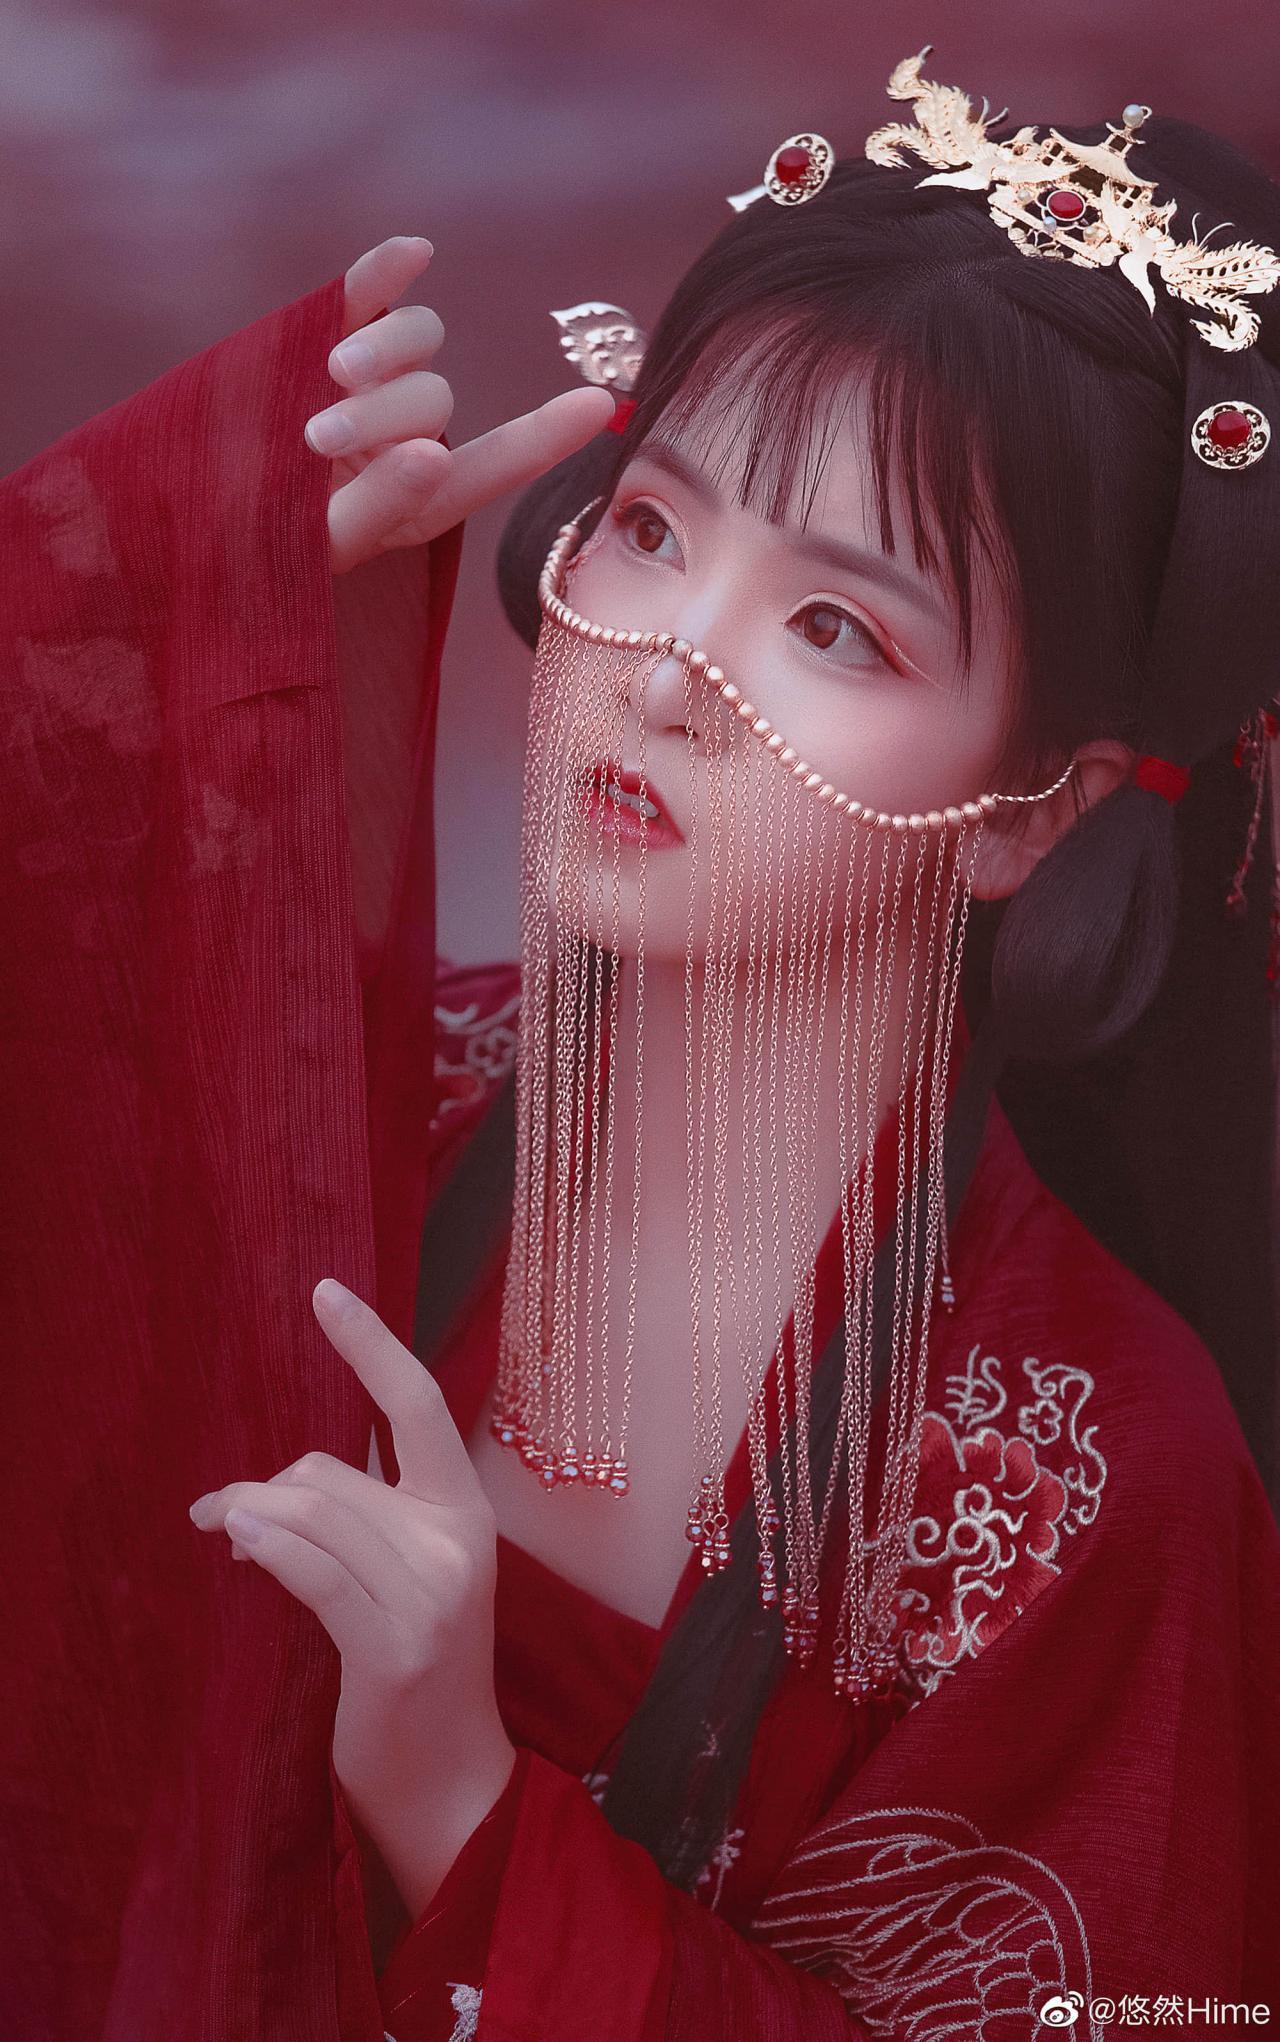 Chinese beautiful girl - Cosplay Princess with historical costume